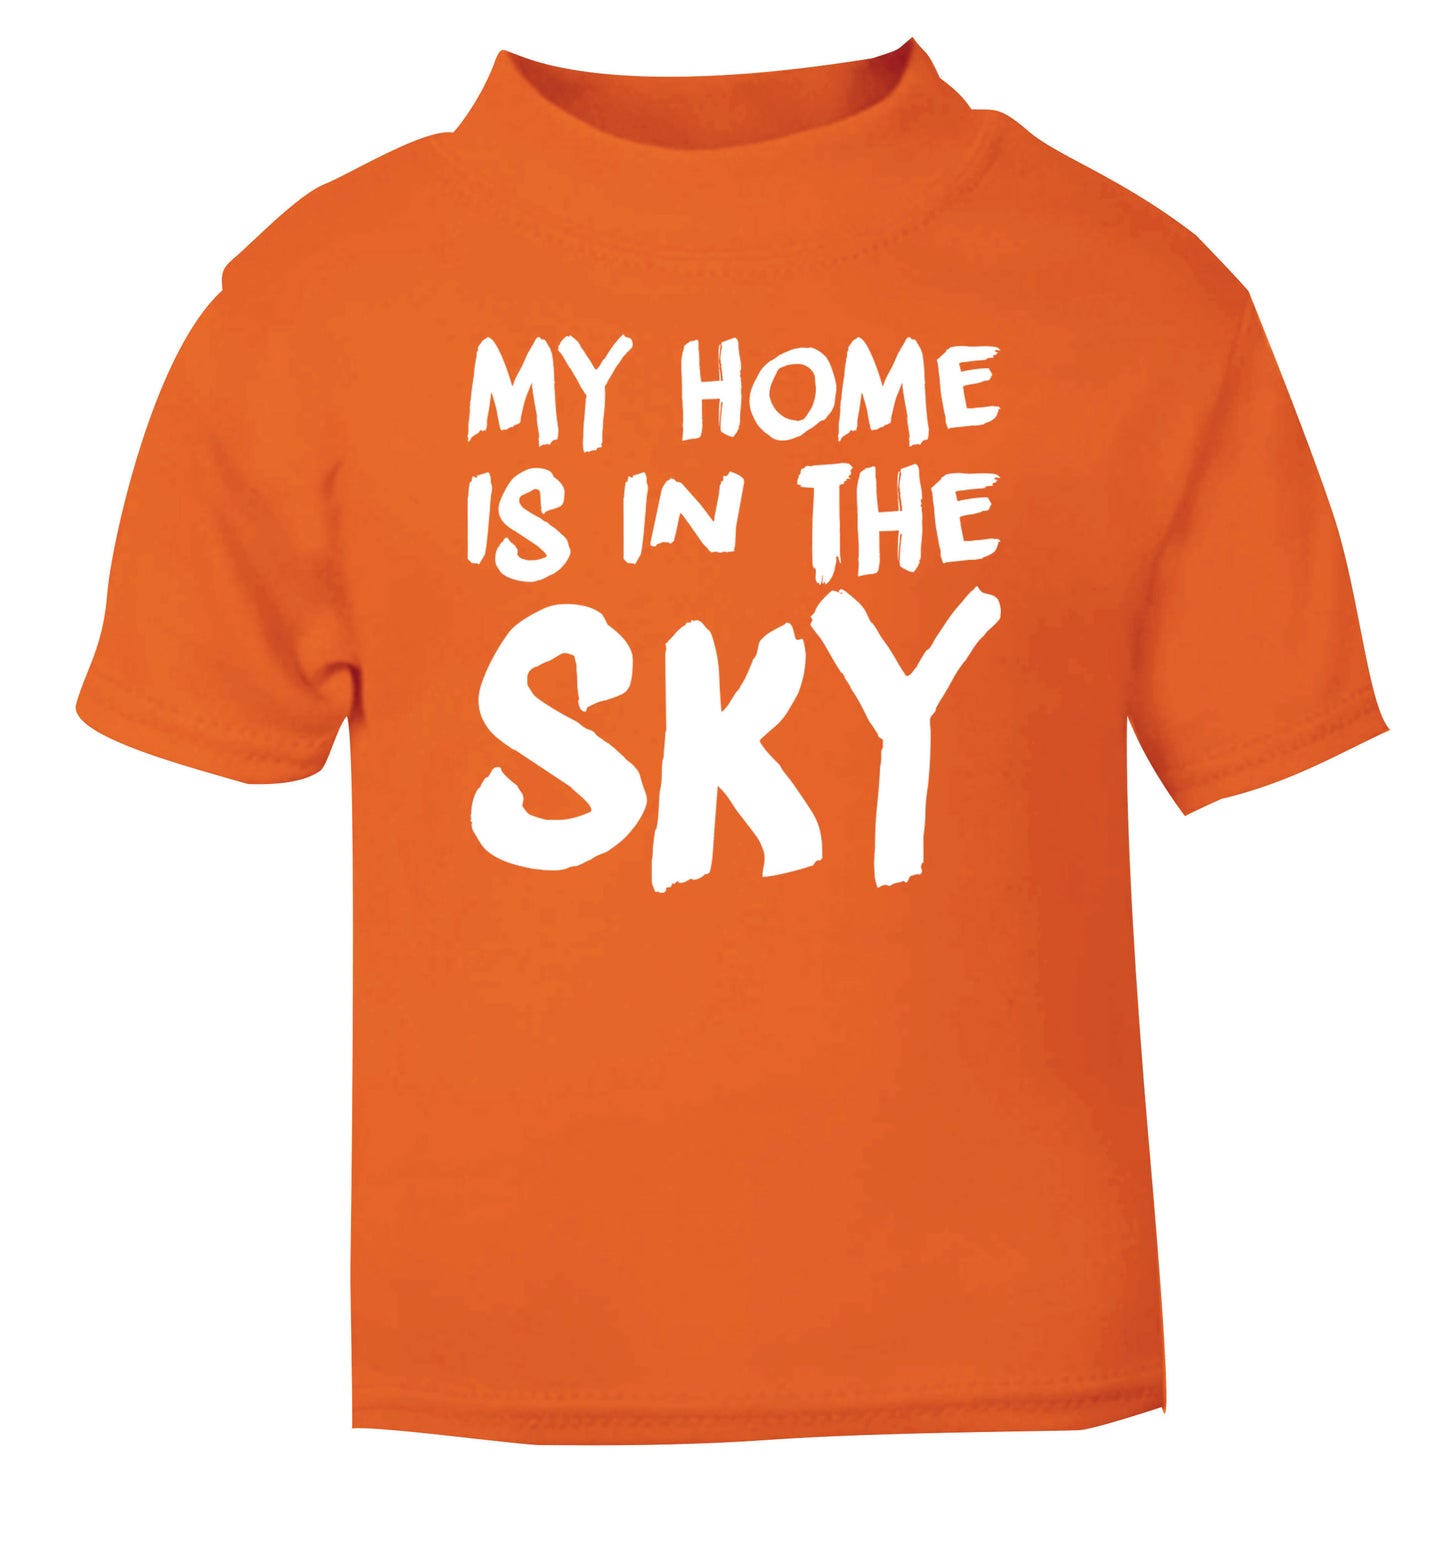 My home is in the sky orange Baby Toddler Tshirt 2 Years